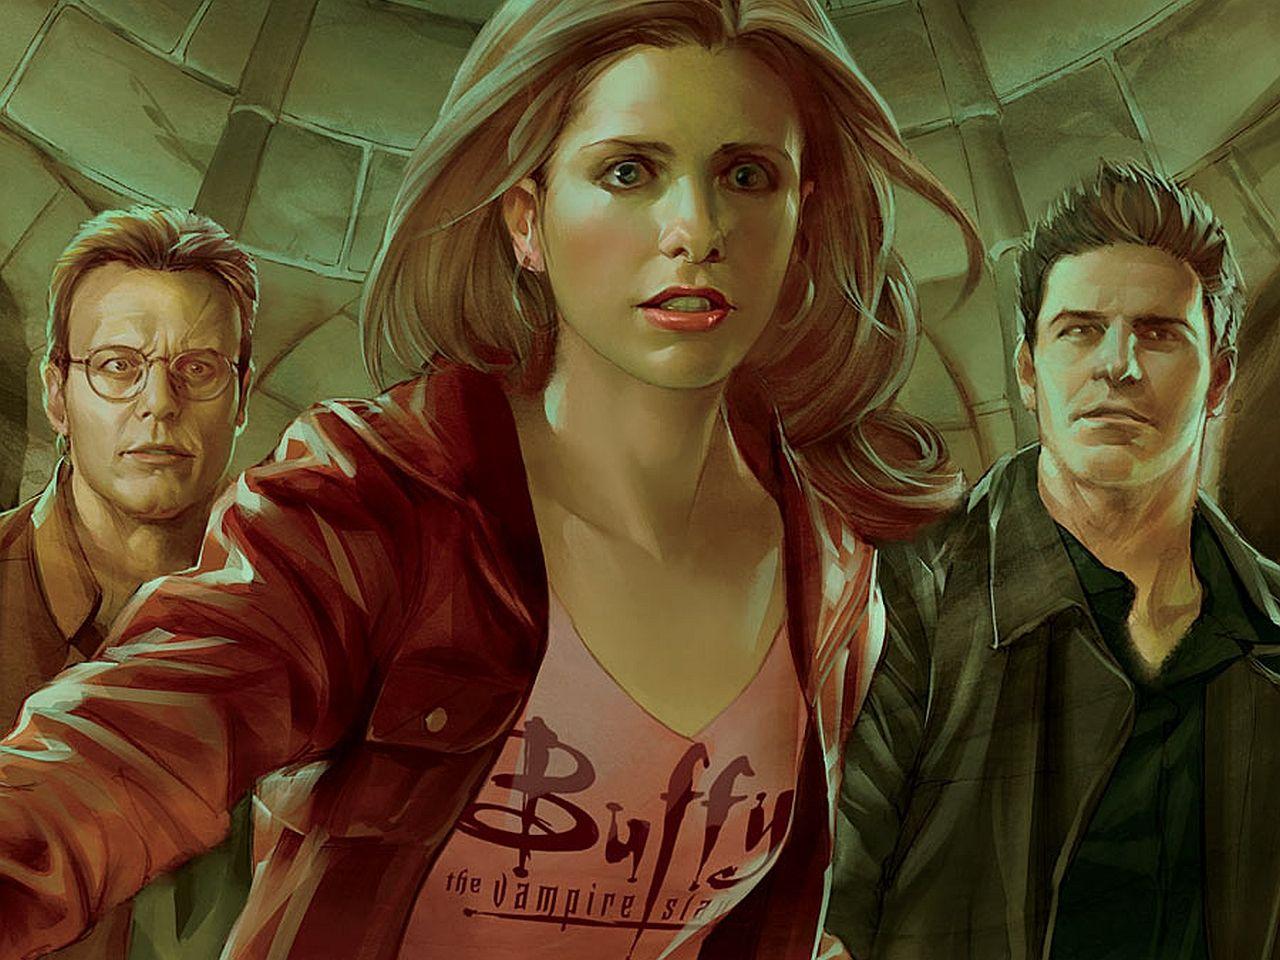 buffy the vampire slayer wallpapers top free buffy the vampire slayer backgrounds wallpaperaccess buffy the vampire slayer wallpapers